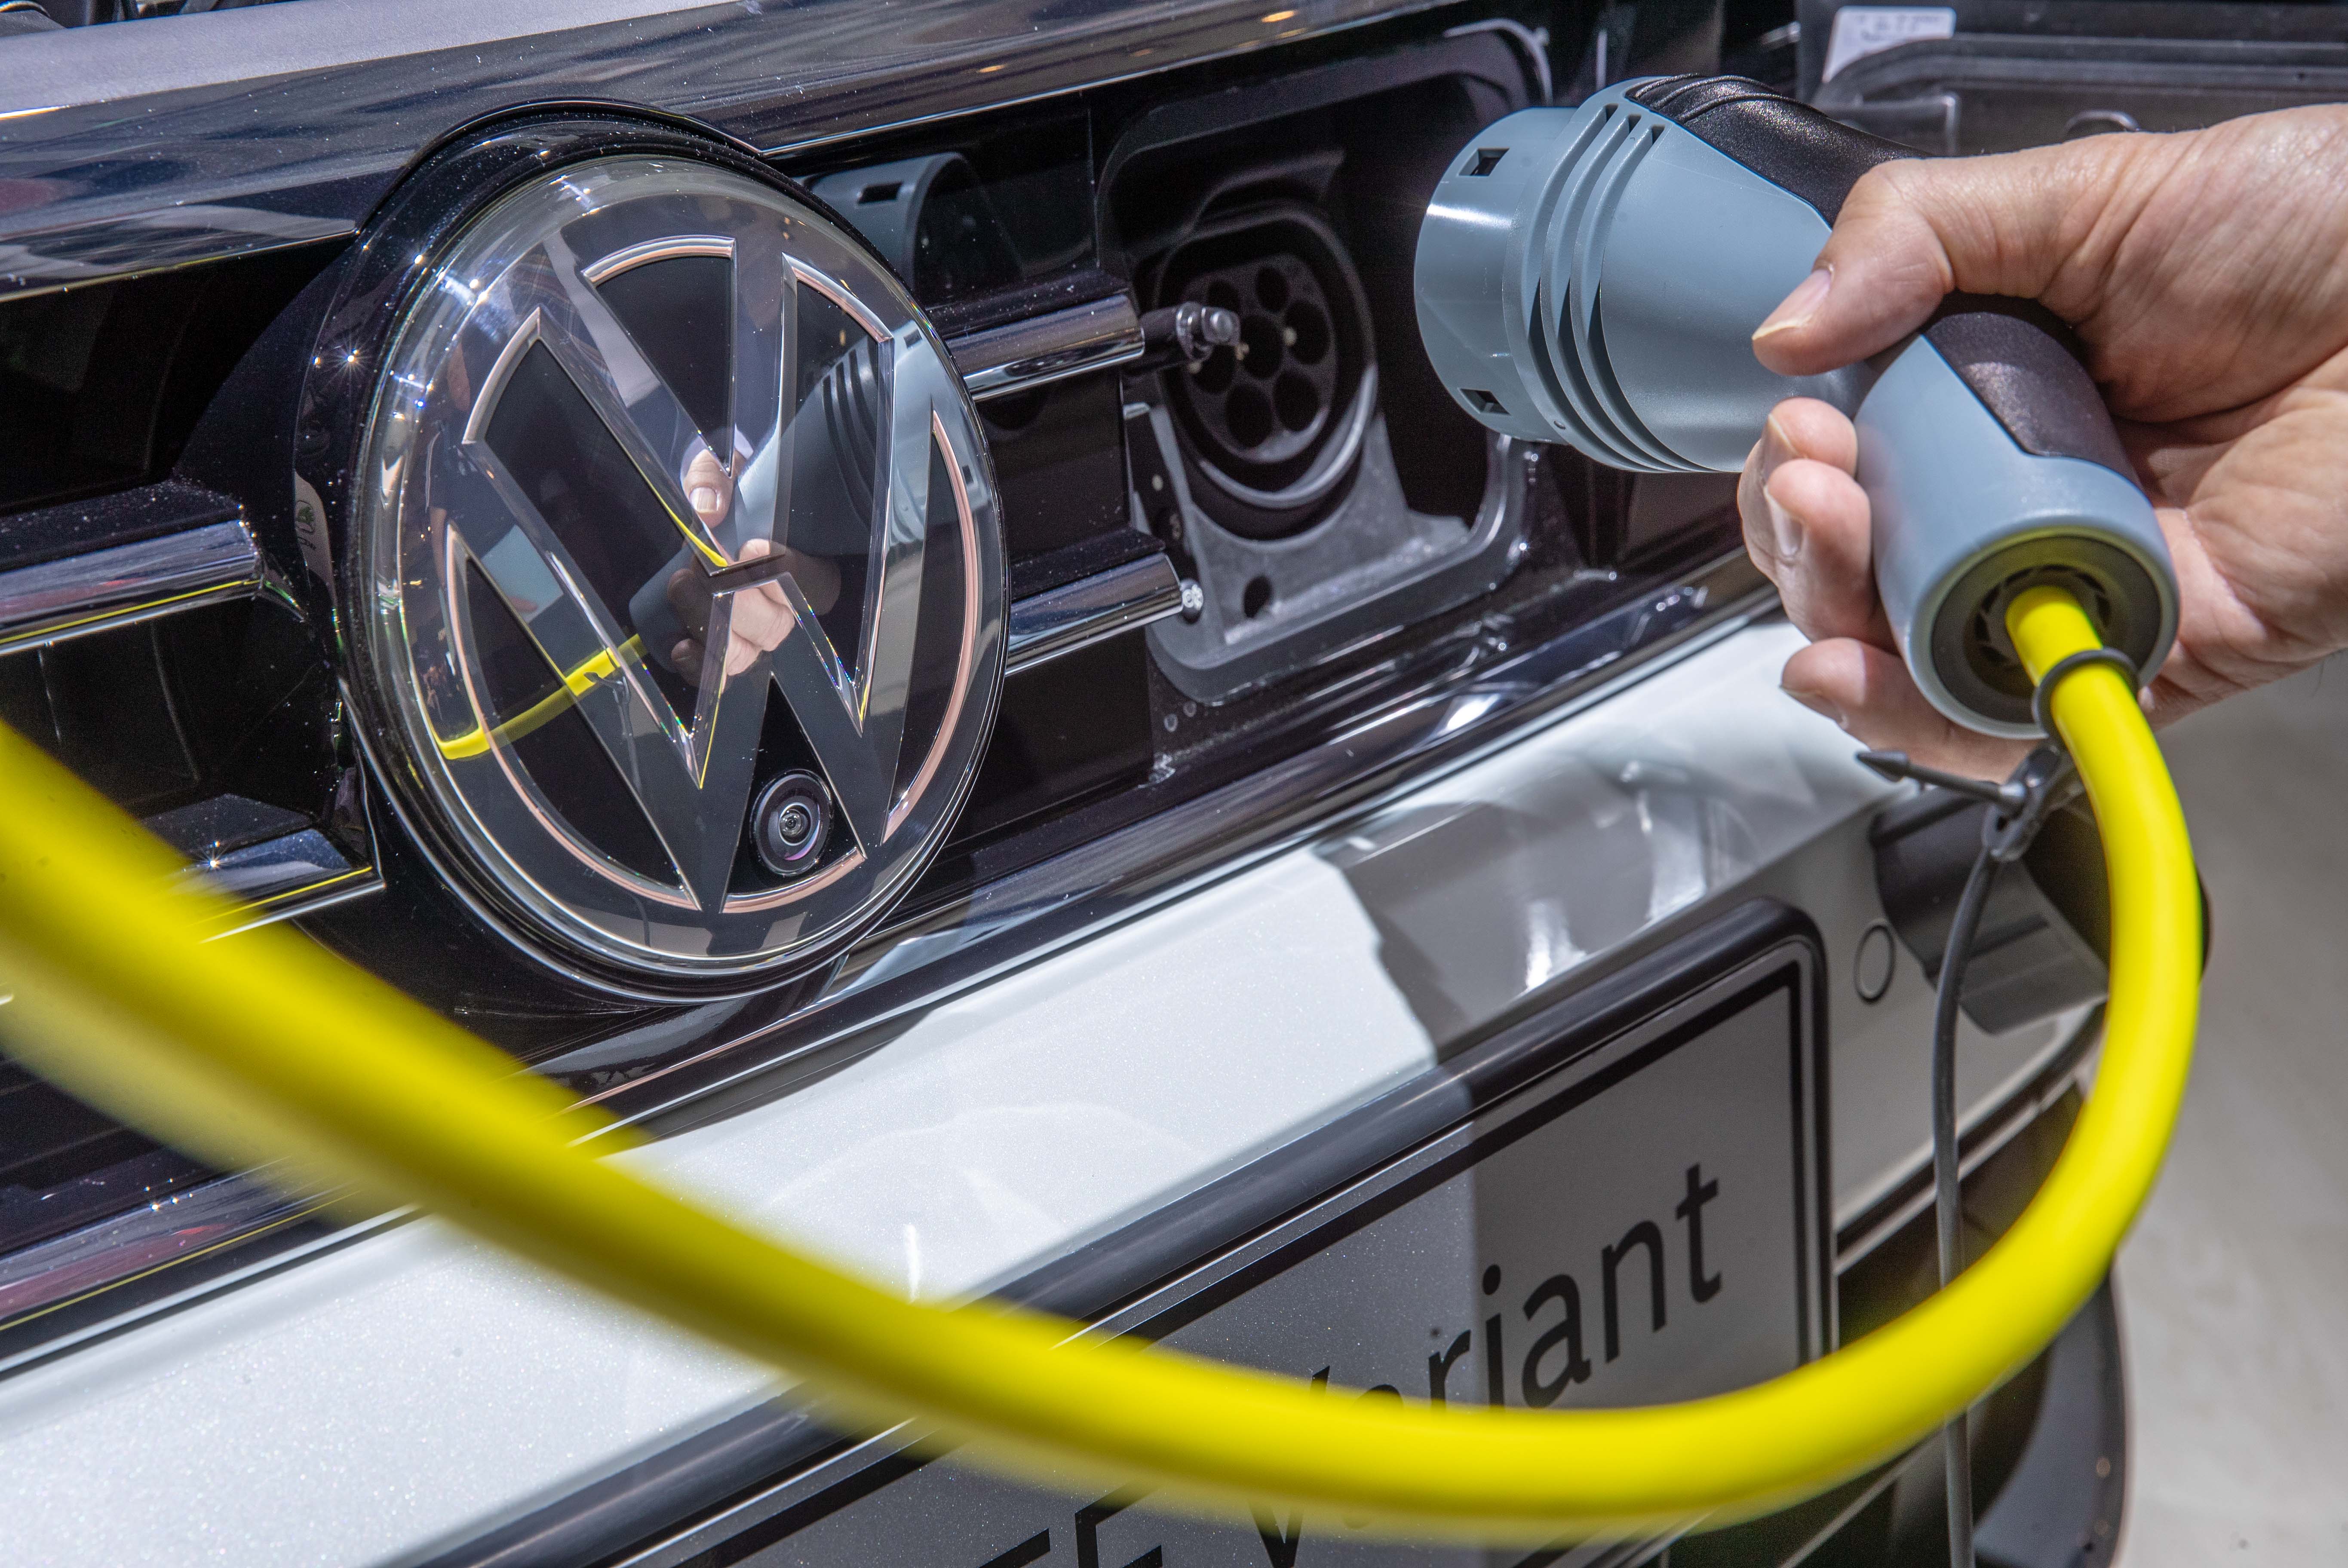 VW's Electrify America to build more EV chargers at Walmart stores